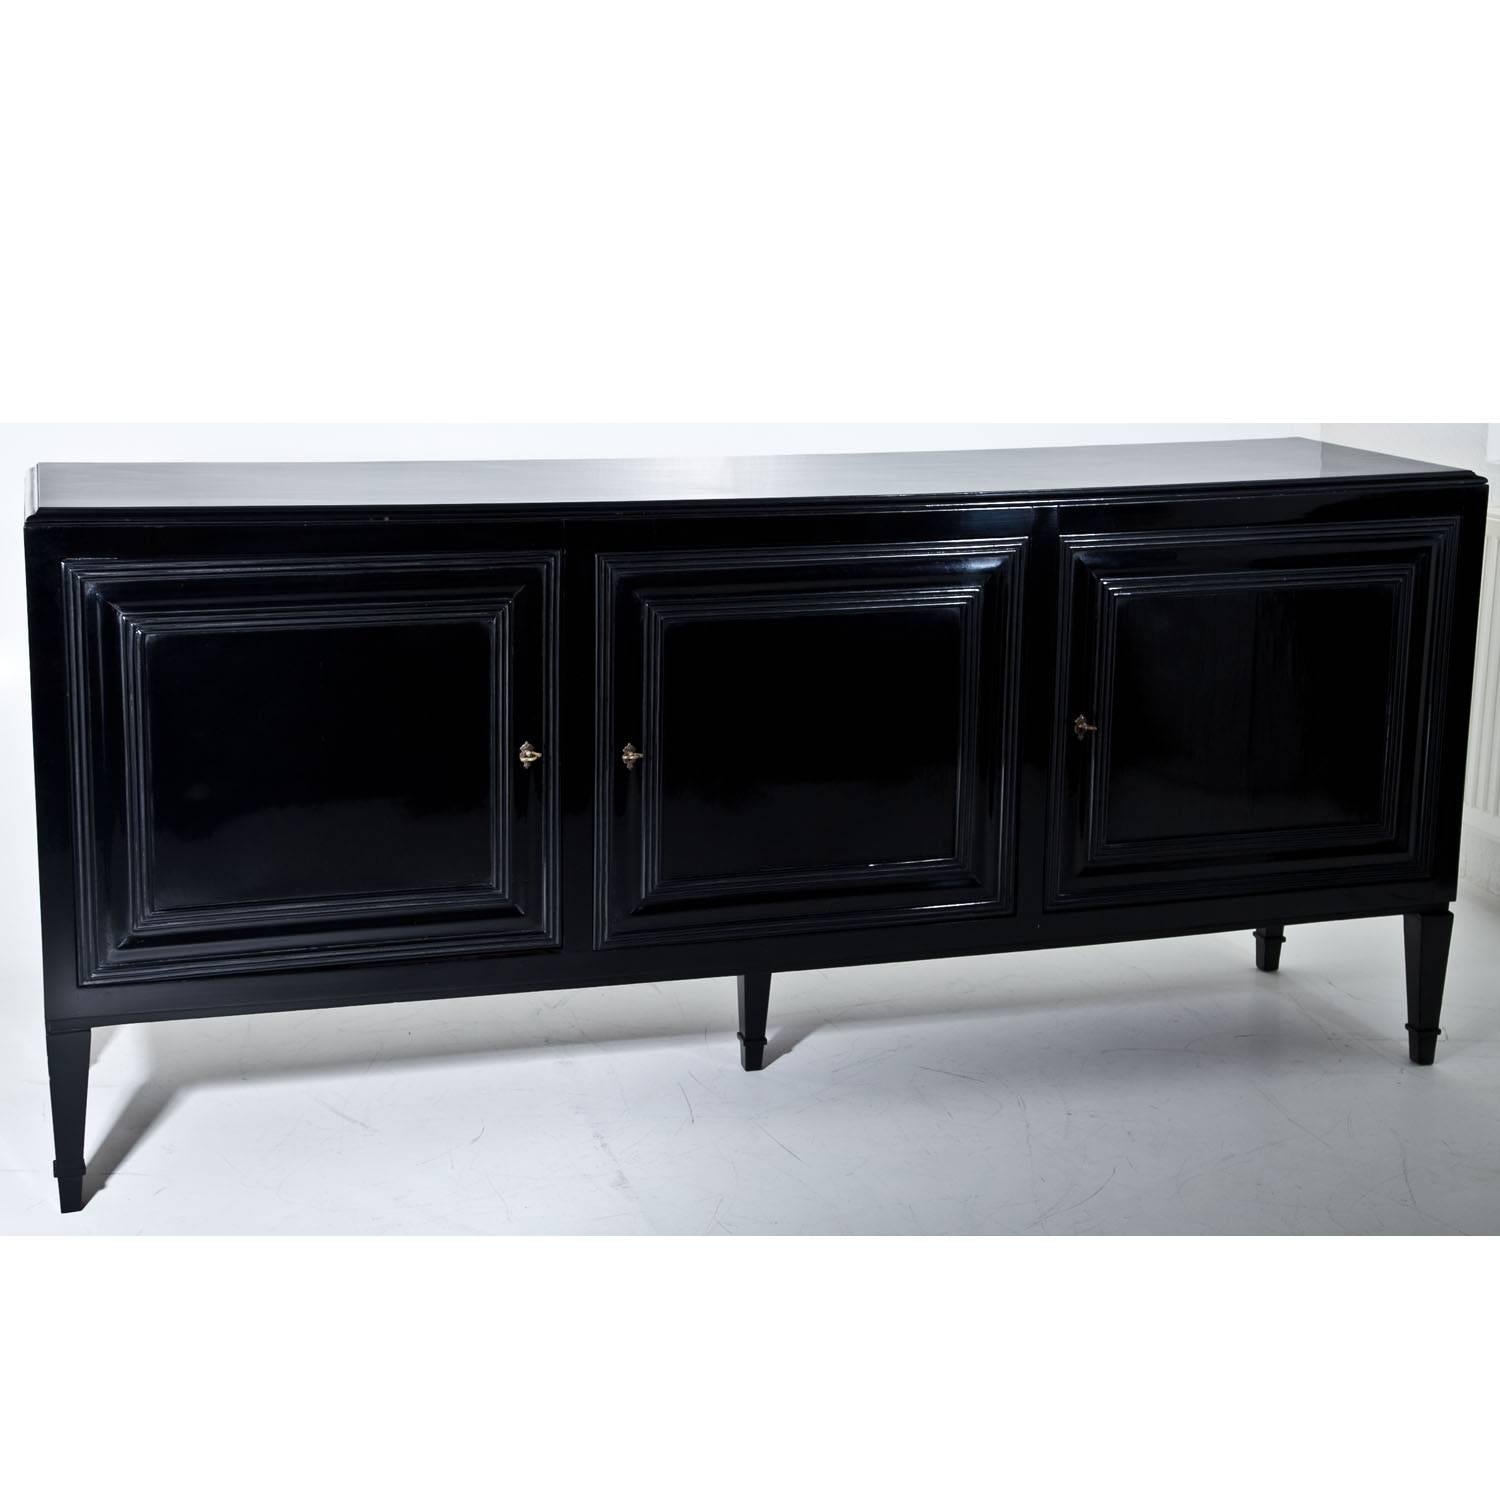 Large sideboard with three doors standing on tapered feet with fillings at the front. The doors and the upper edge show nice moldings. The sideboard was later ebonized.